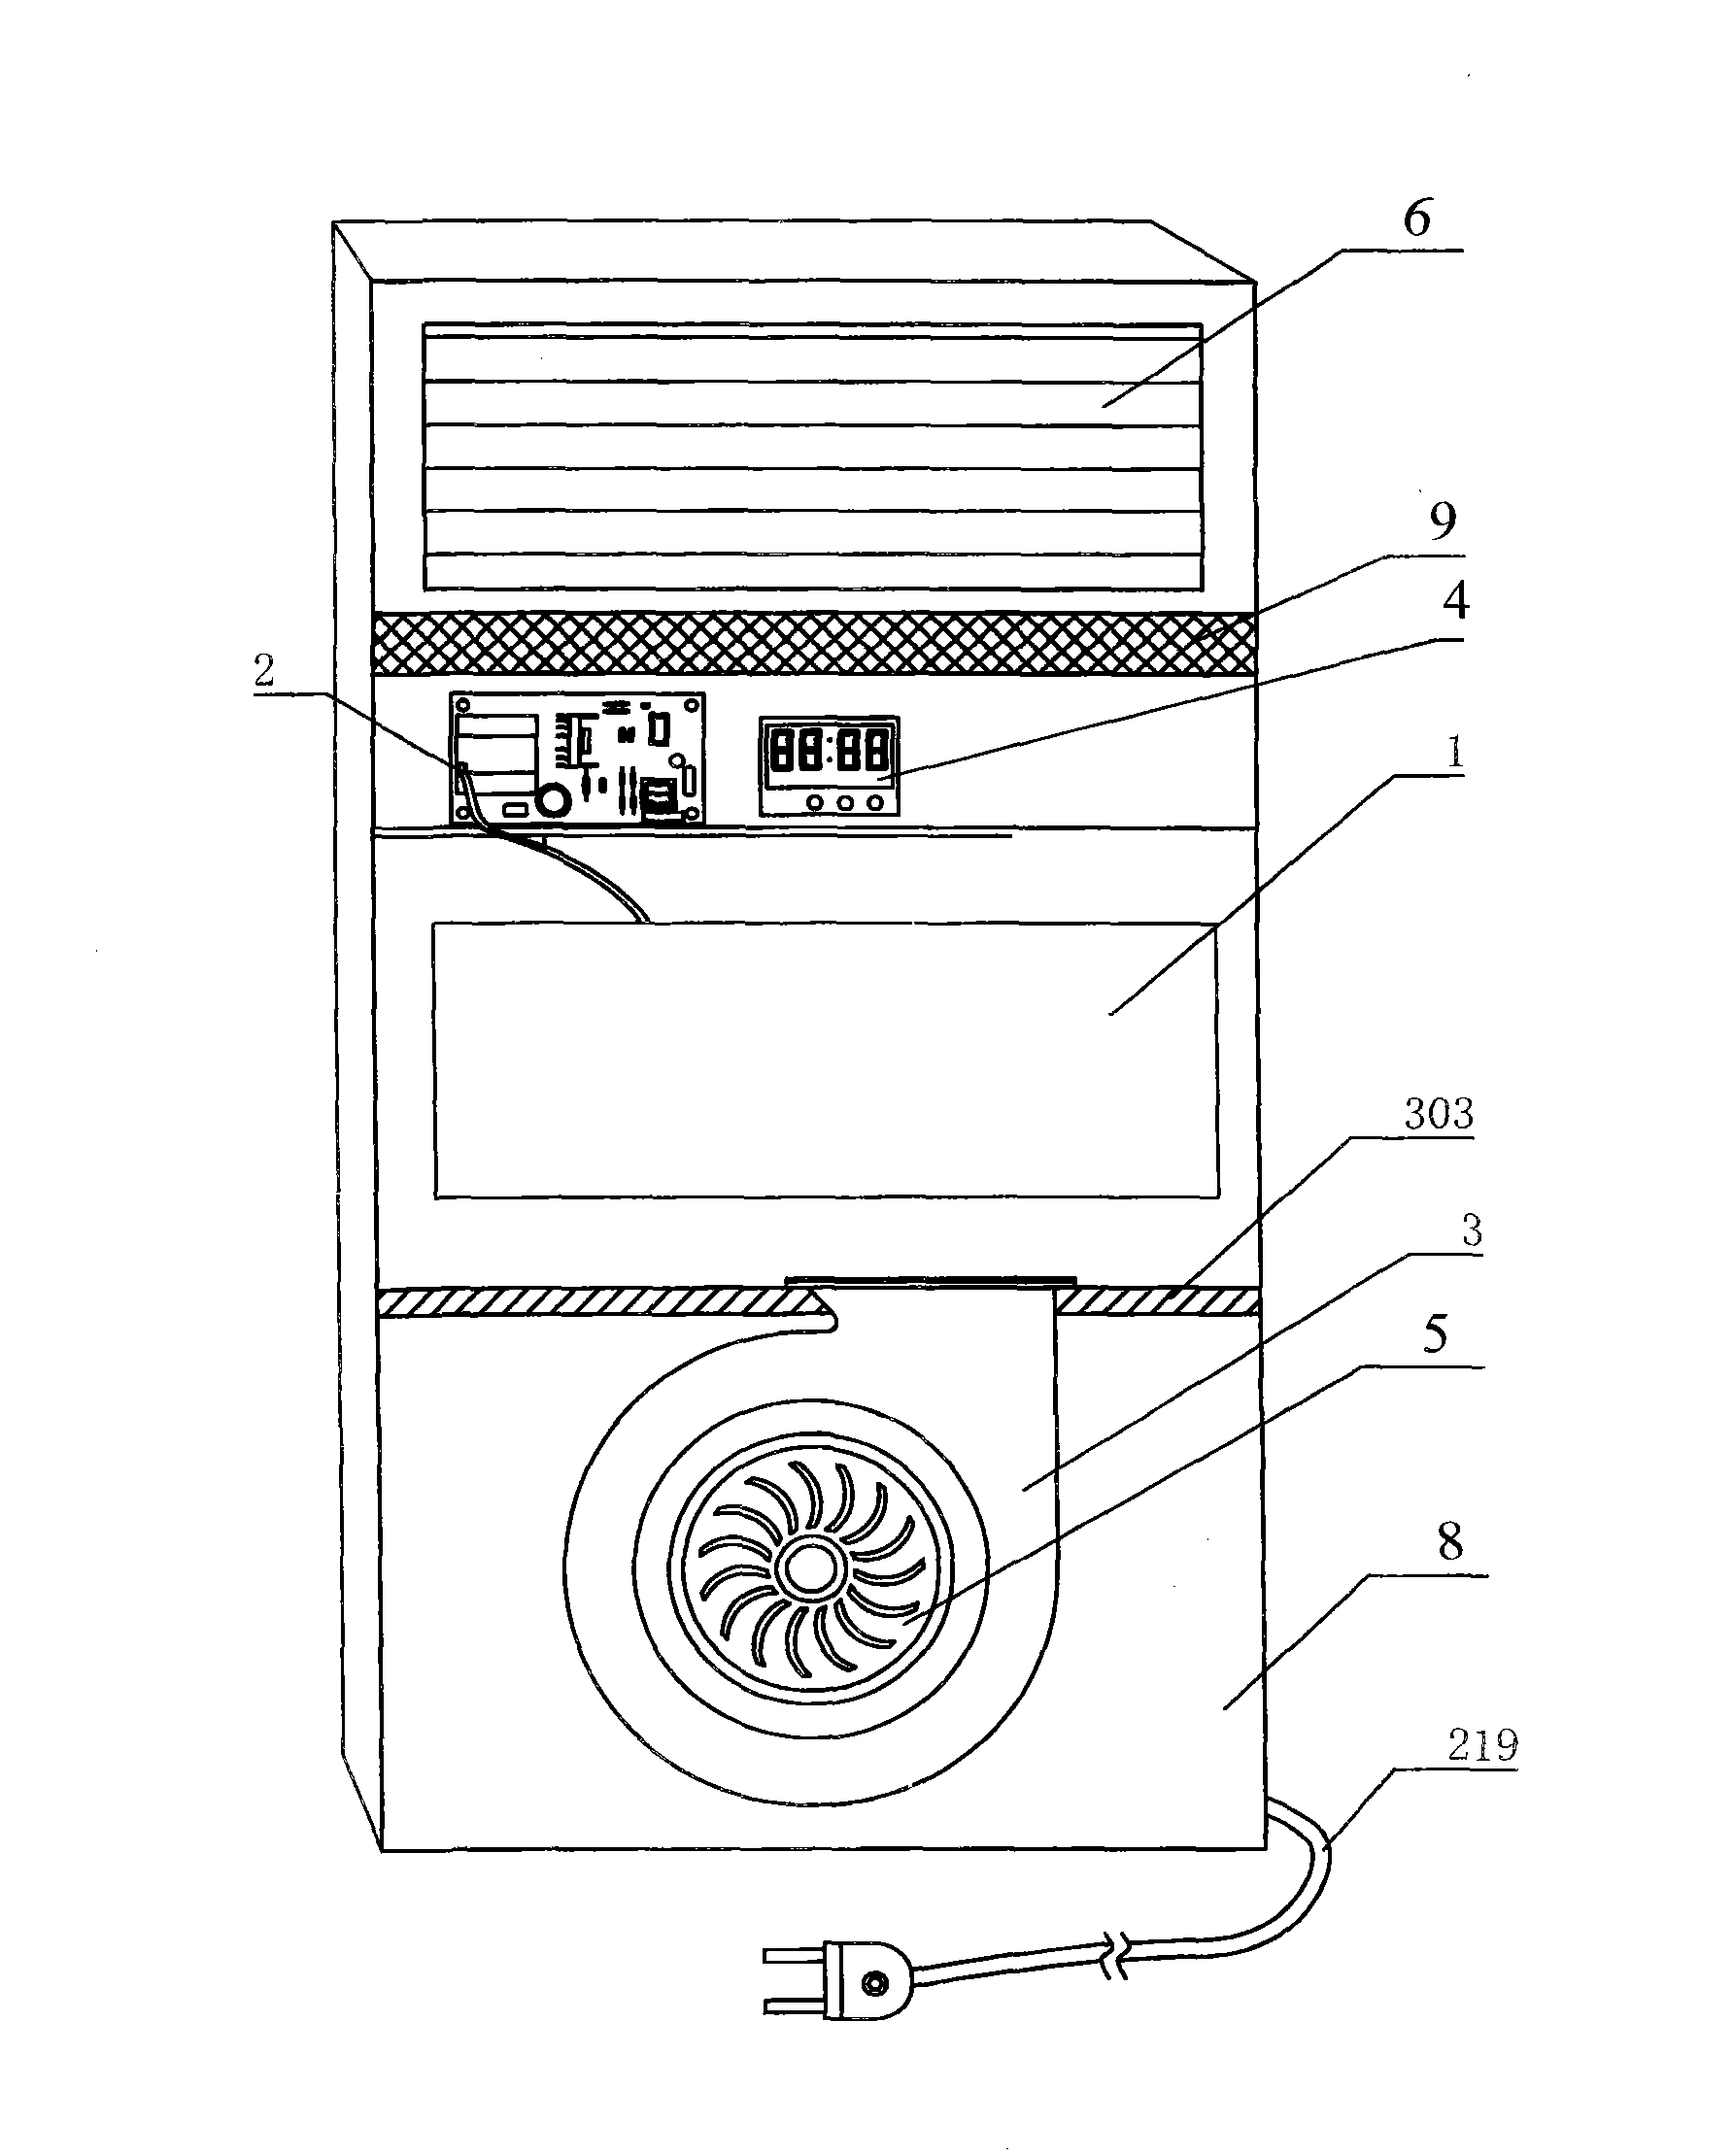 Purifier with metal band-plate structure reactor